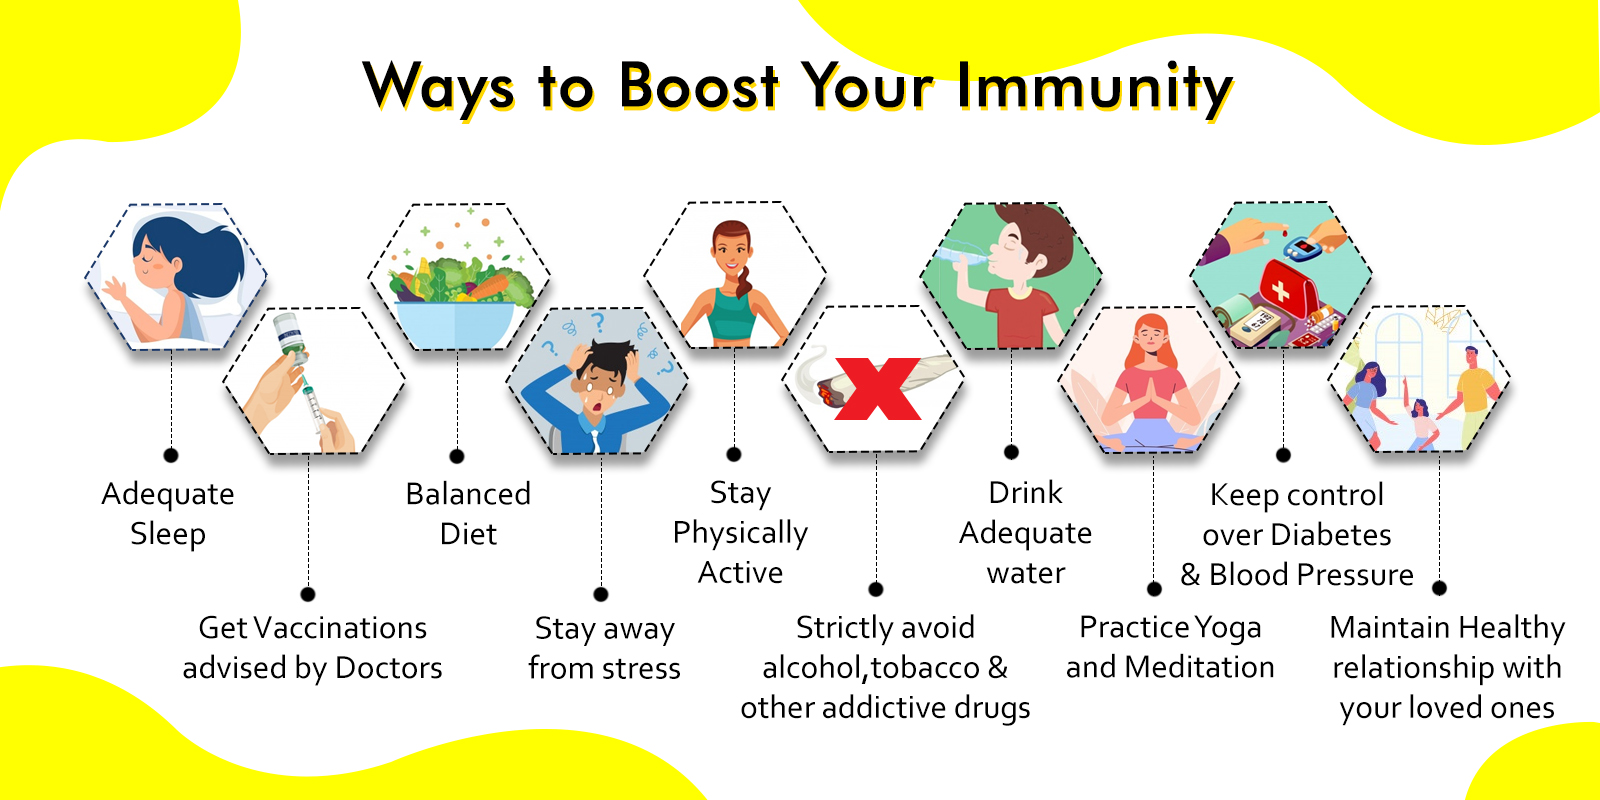 BOOST YOUR IMMUNITY TO FIGHT DEADLY DISEASES LIKE COVID-19. - News Anyway